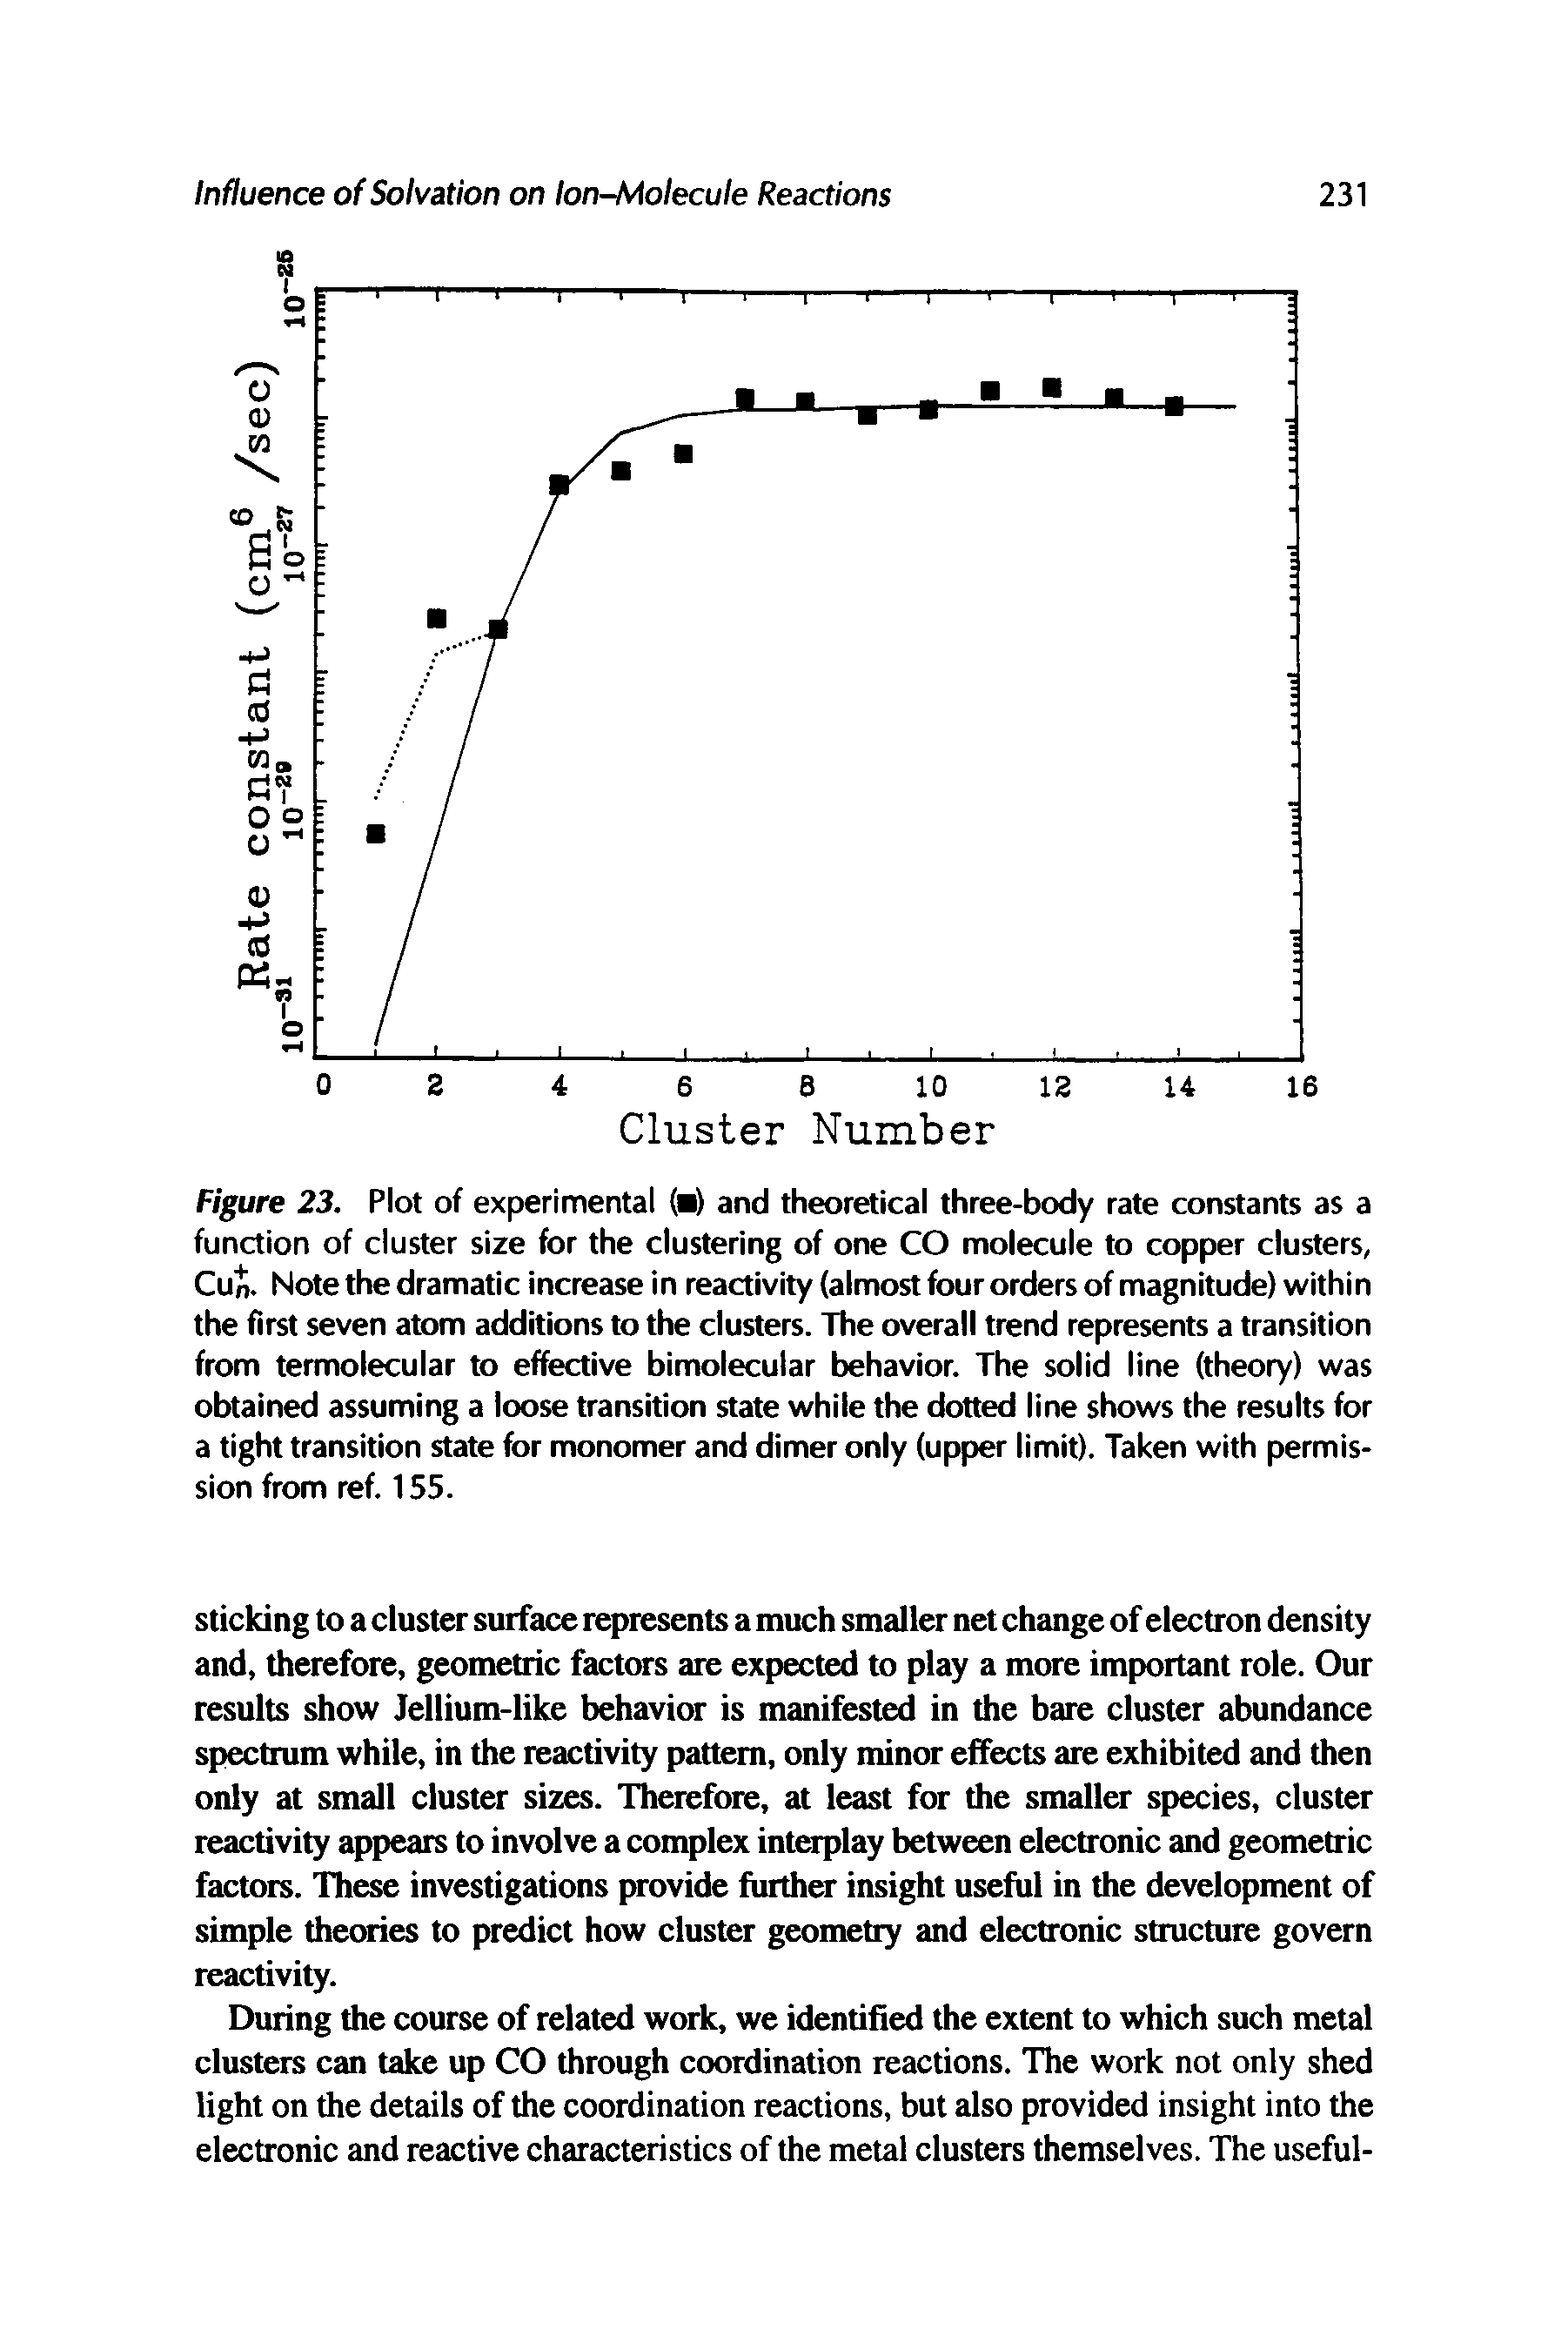 Figure 23. Plot of experimental ( ) and theoretical three-body rate constants as a function of cluster size for the clustering of one CO molecule to copper clusters, Cun. Note the dramatic increase in reactivity (almost four orders of magnitude) within the first seven atom additions to the clusters. The overall trend represents a transition from termolecular to effective bimolecular behavior. The solid line (theory) was obtained assuming a loose transition state while the dotted line shows the results for a tight transition state for monomer and dimer only (upper limit). Taken with permission from ref. 155.